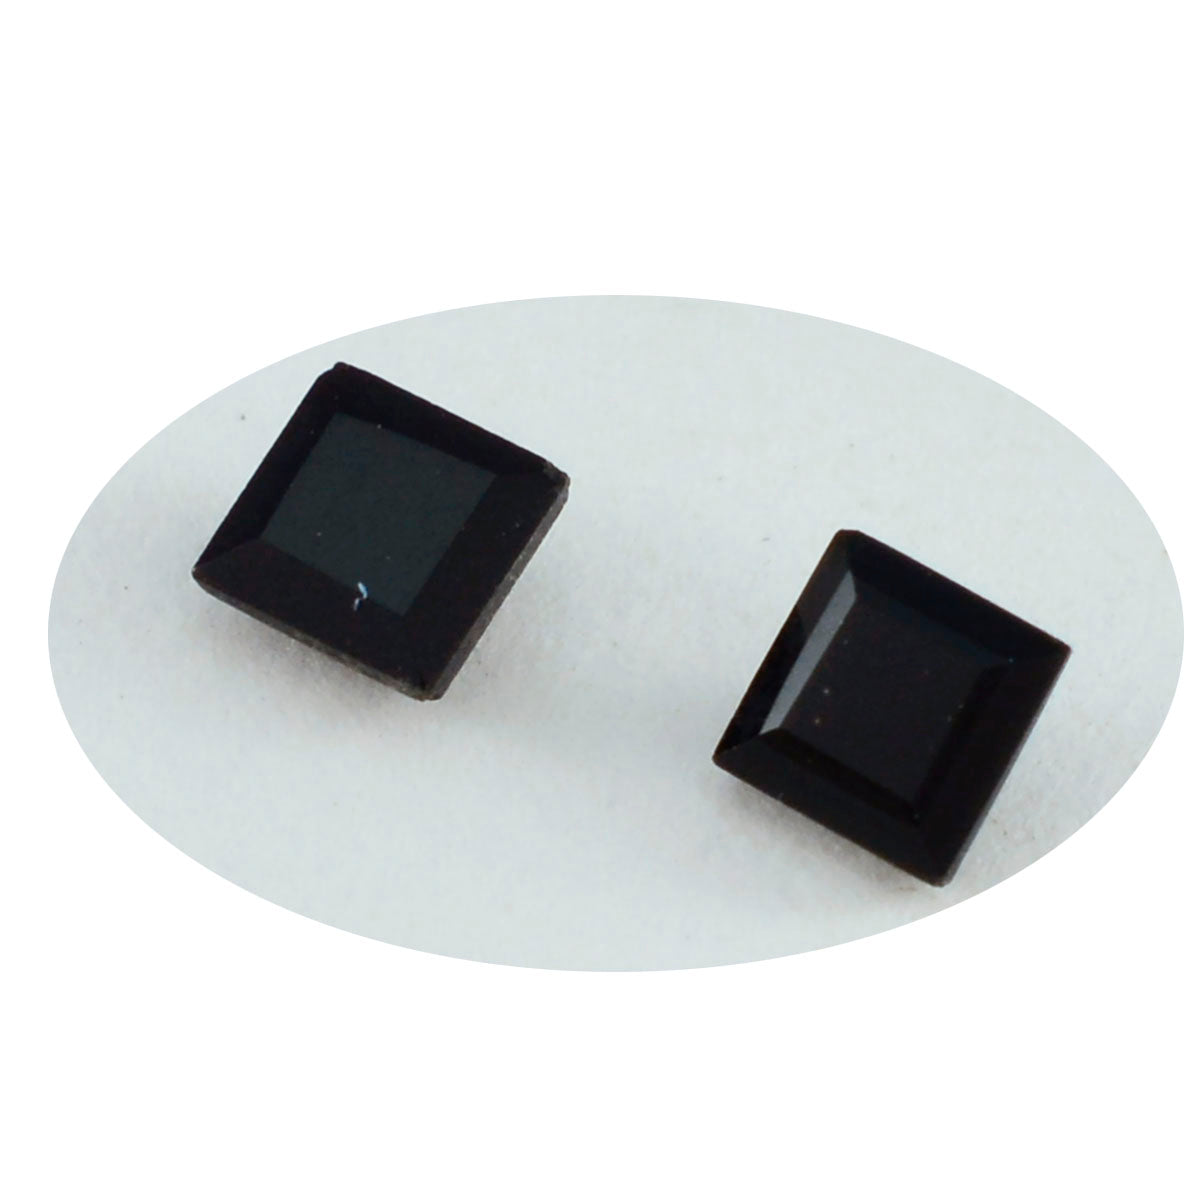 Riyogems 1PC Natural Black Onyx Faceted 7x7 mm Square Shape sweet Quality Loose Stone